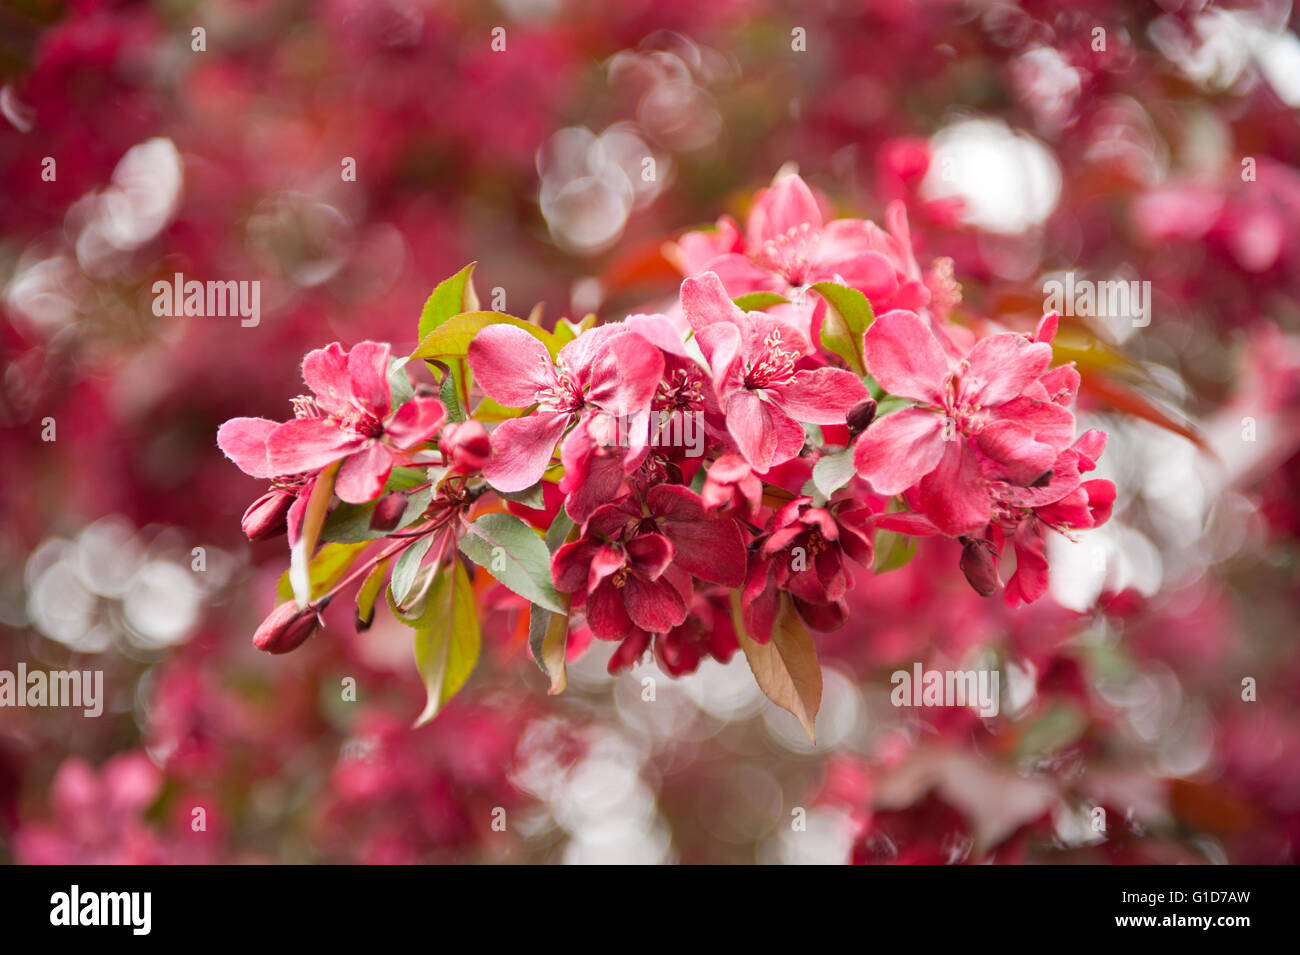 Red Malus Royalty Crab apple tree flowering in spring season in Poland, Europe, plenty flowers and leaves on the lush blooming. Stock Photo